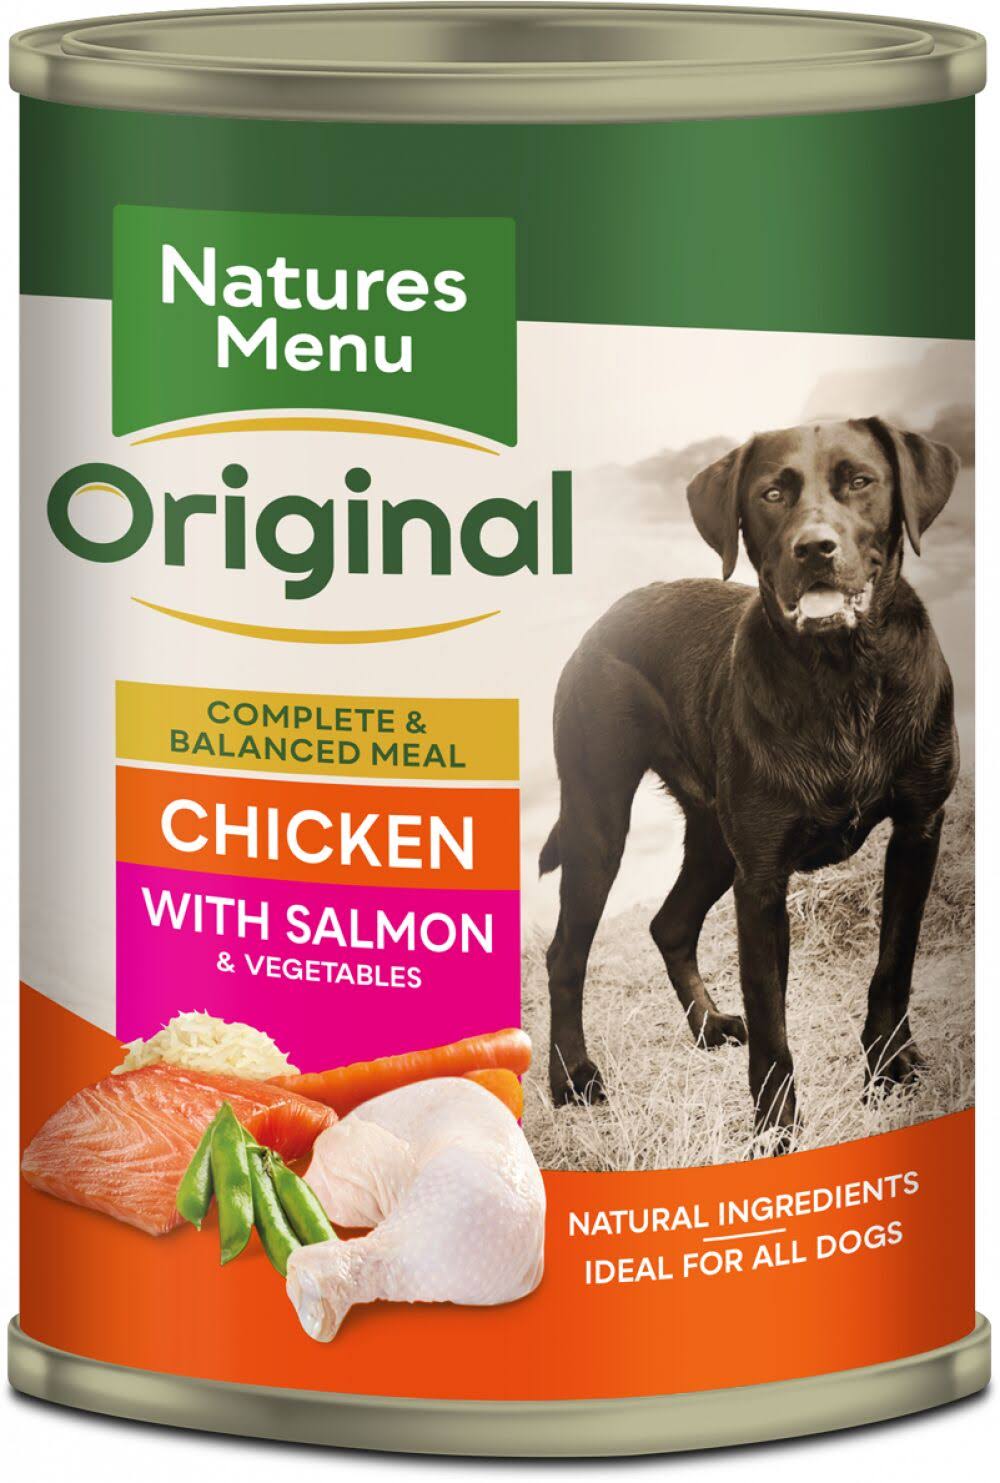 Natures Menu Chicken with Salmon Dog Food Cans - 12 x 400g